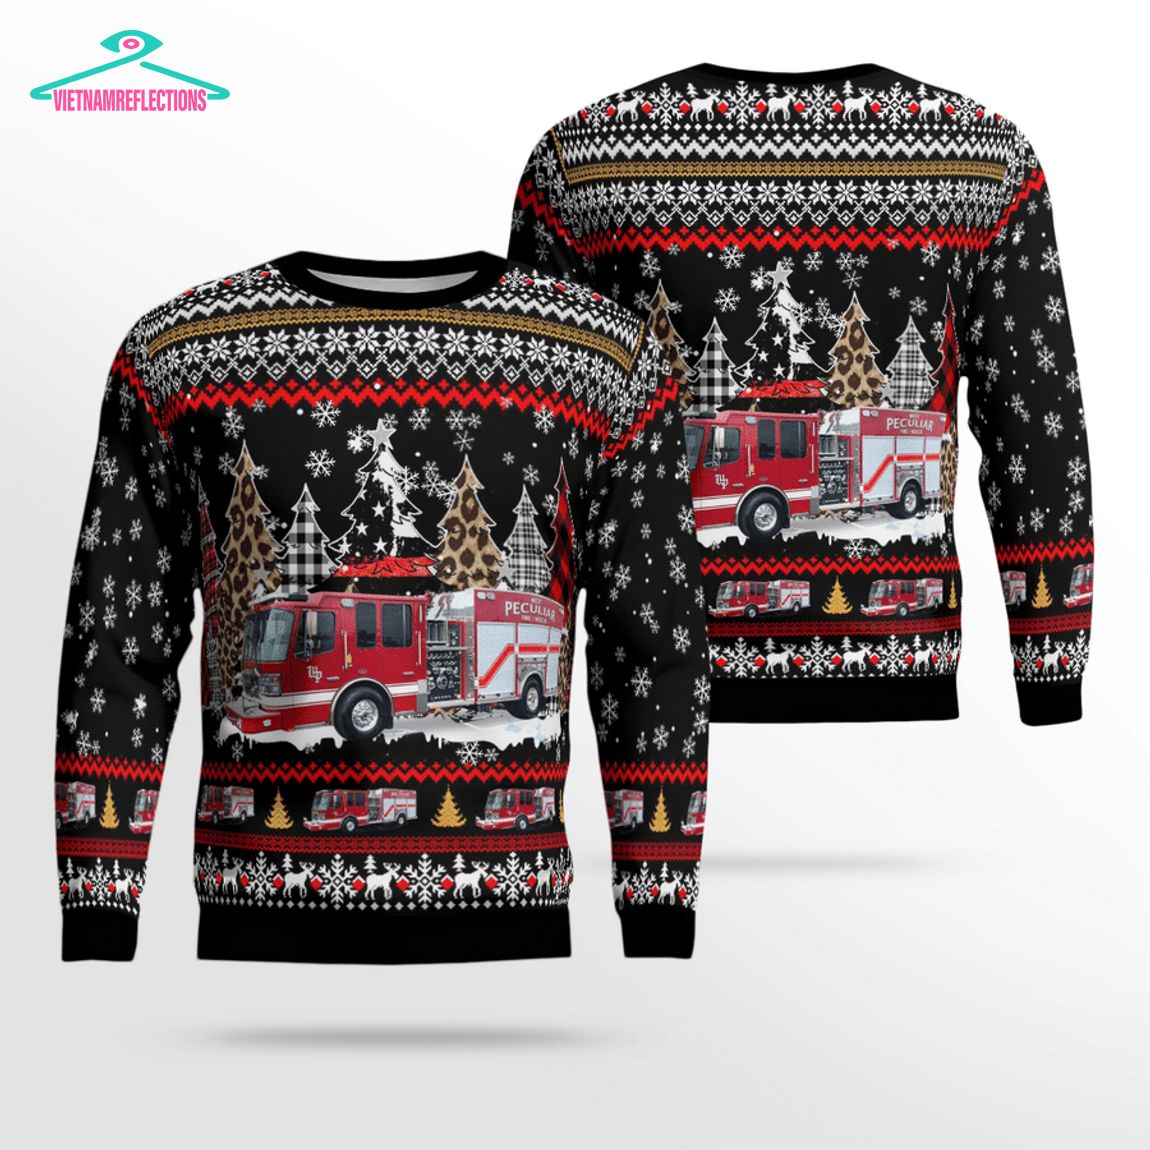 west-peculiar-fire-protection-district-3d-christmas-sweater-1-M7sOi.jpg